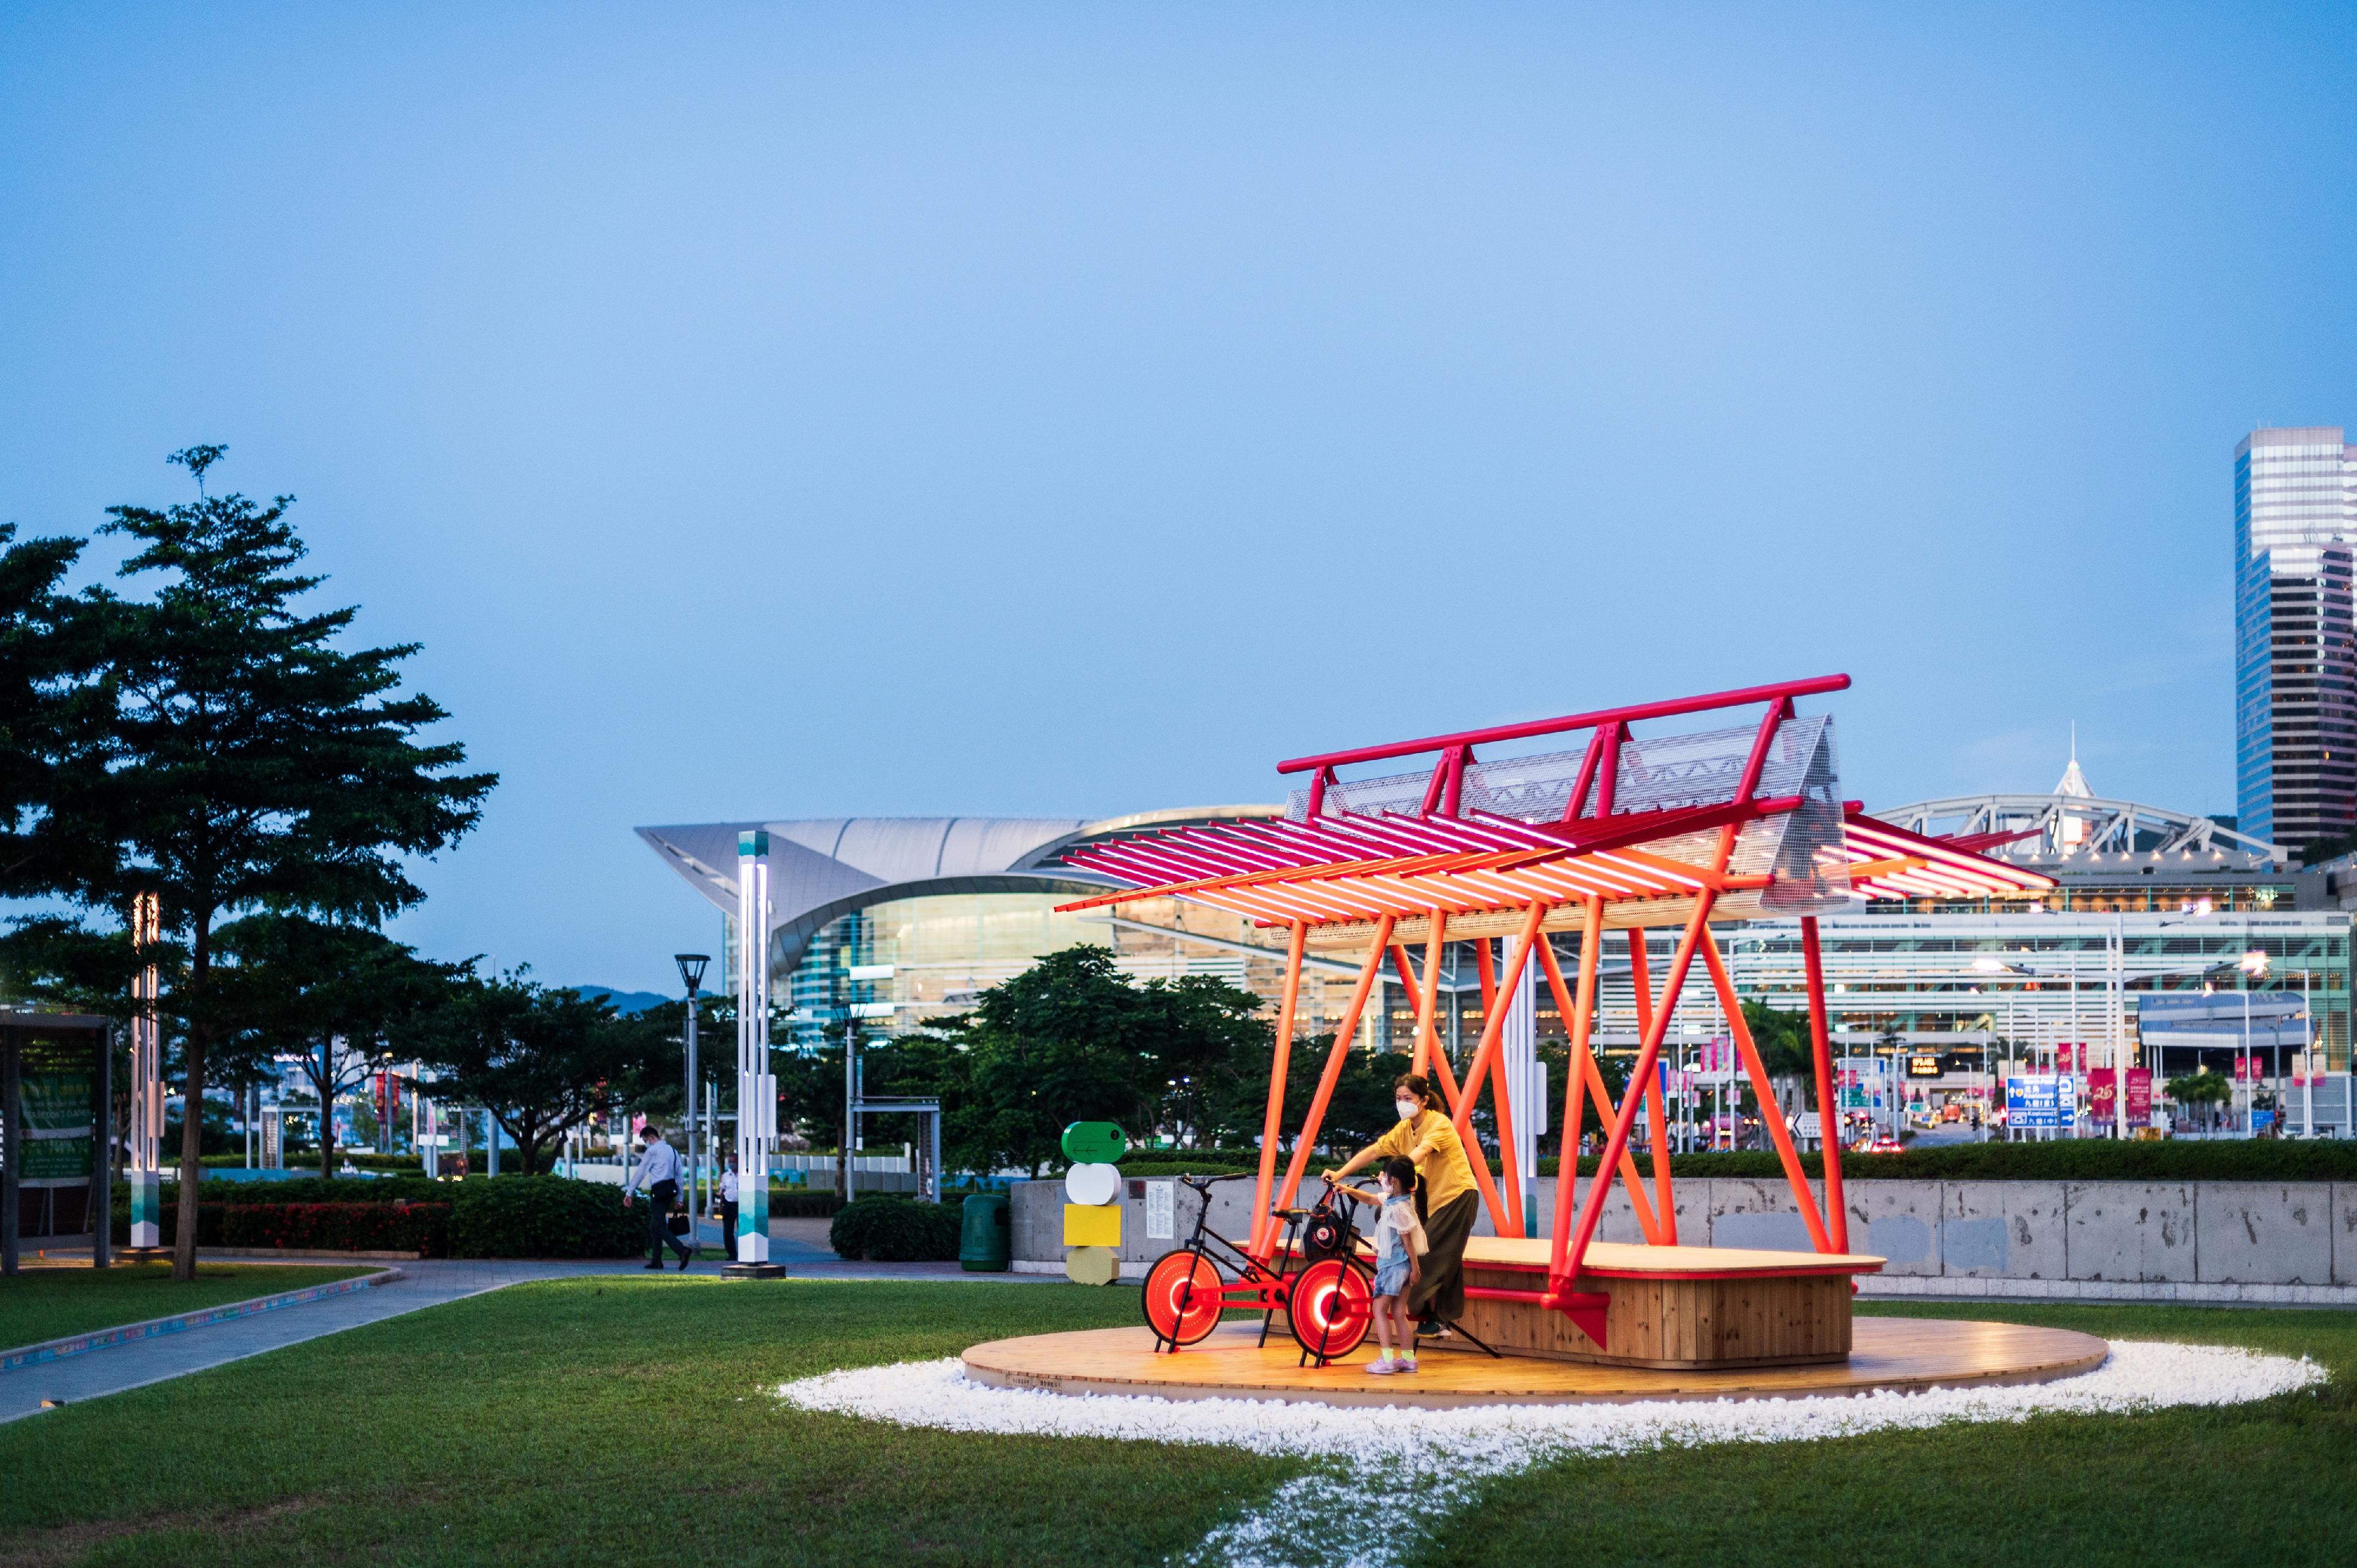 The Art Promotion Office's commissioned artwork "The Ornithopter" was the finalist for the Special Award - Architectural Installation, Curation & Exhibition Design of the HKIA Annual Awards.